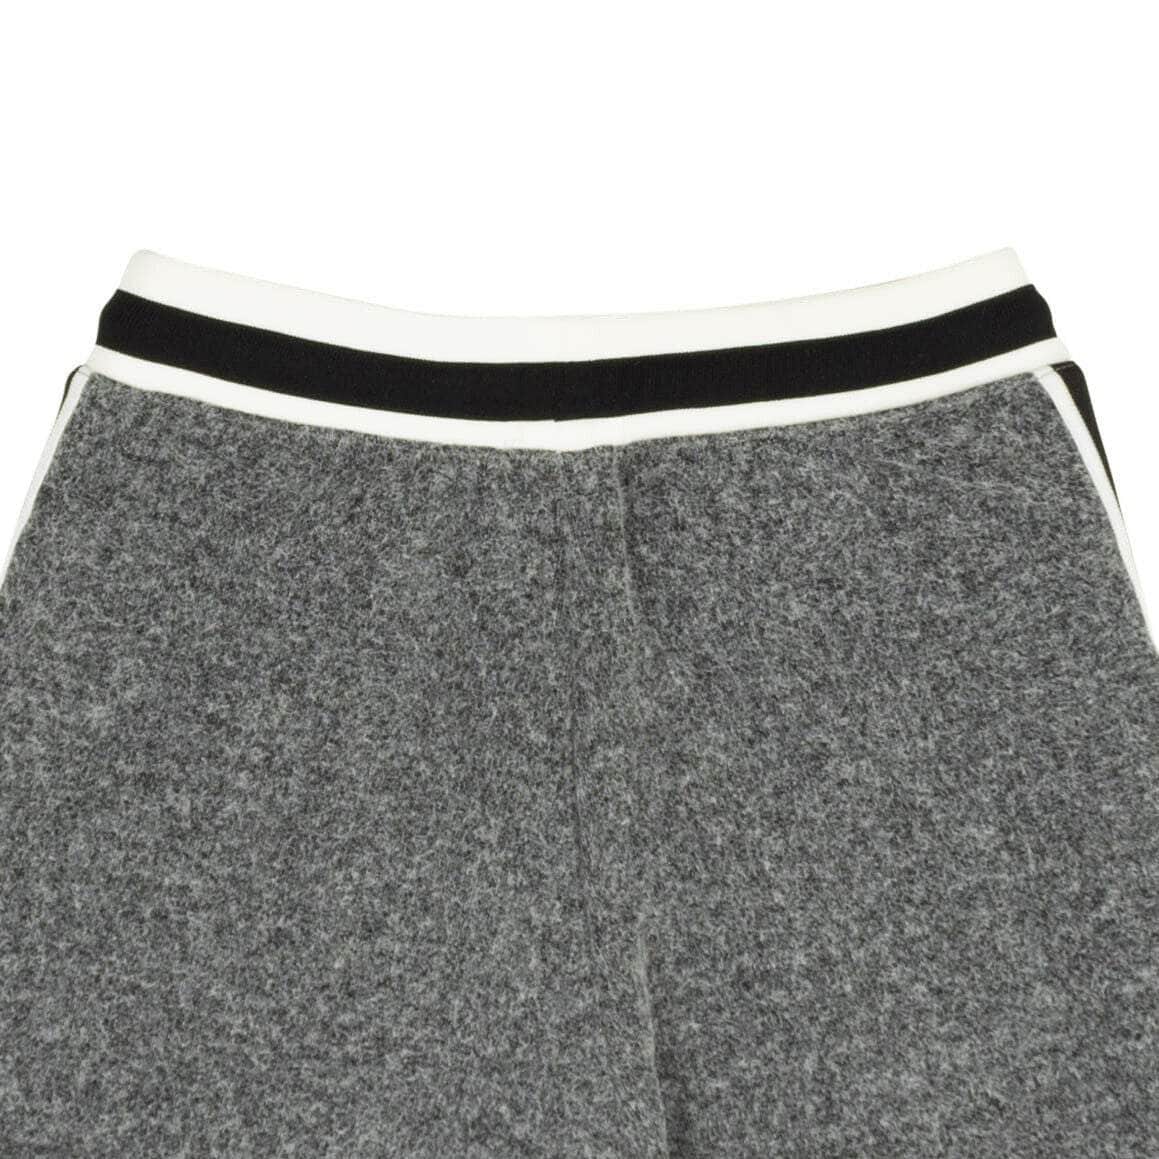 John Elliott 250-500, channelenable-all, chicmi, couponcollection, gender-mens, john-elliott, main-clothing, size-1, size-2 1 Charcoal Gray Fur Terry Game Shorts 95-JEL-1271/1 95-JEL-1271/1